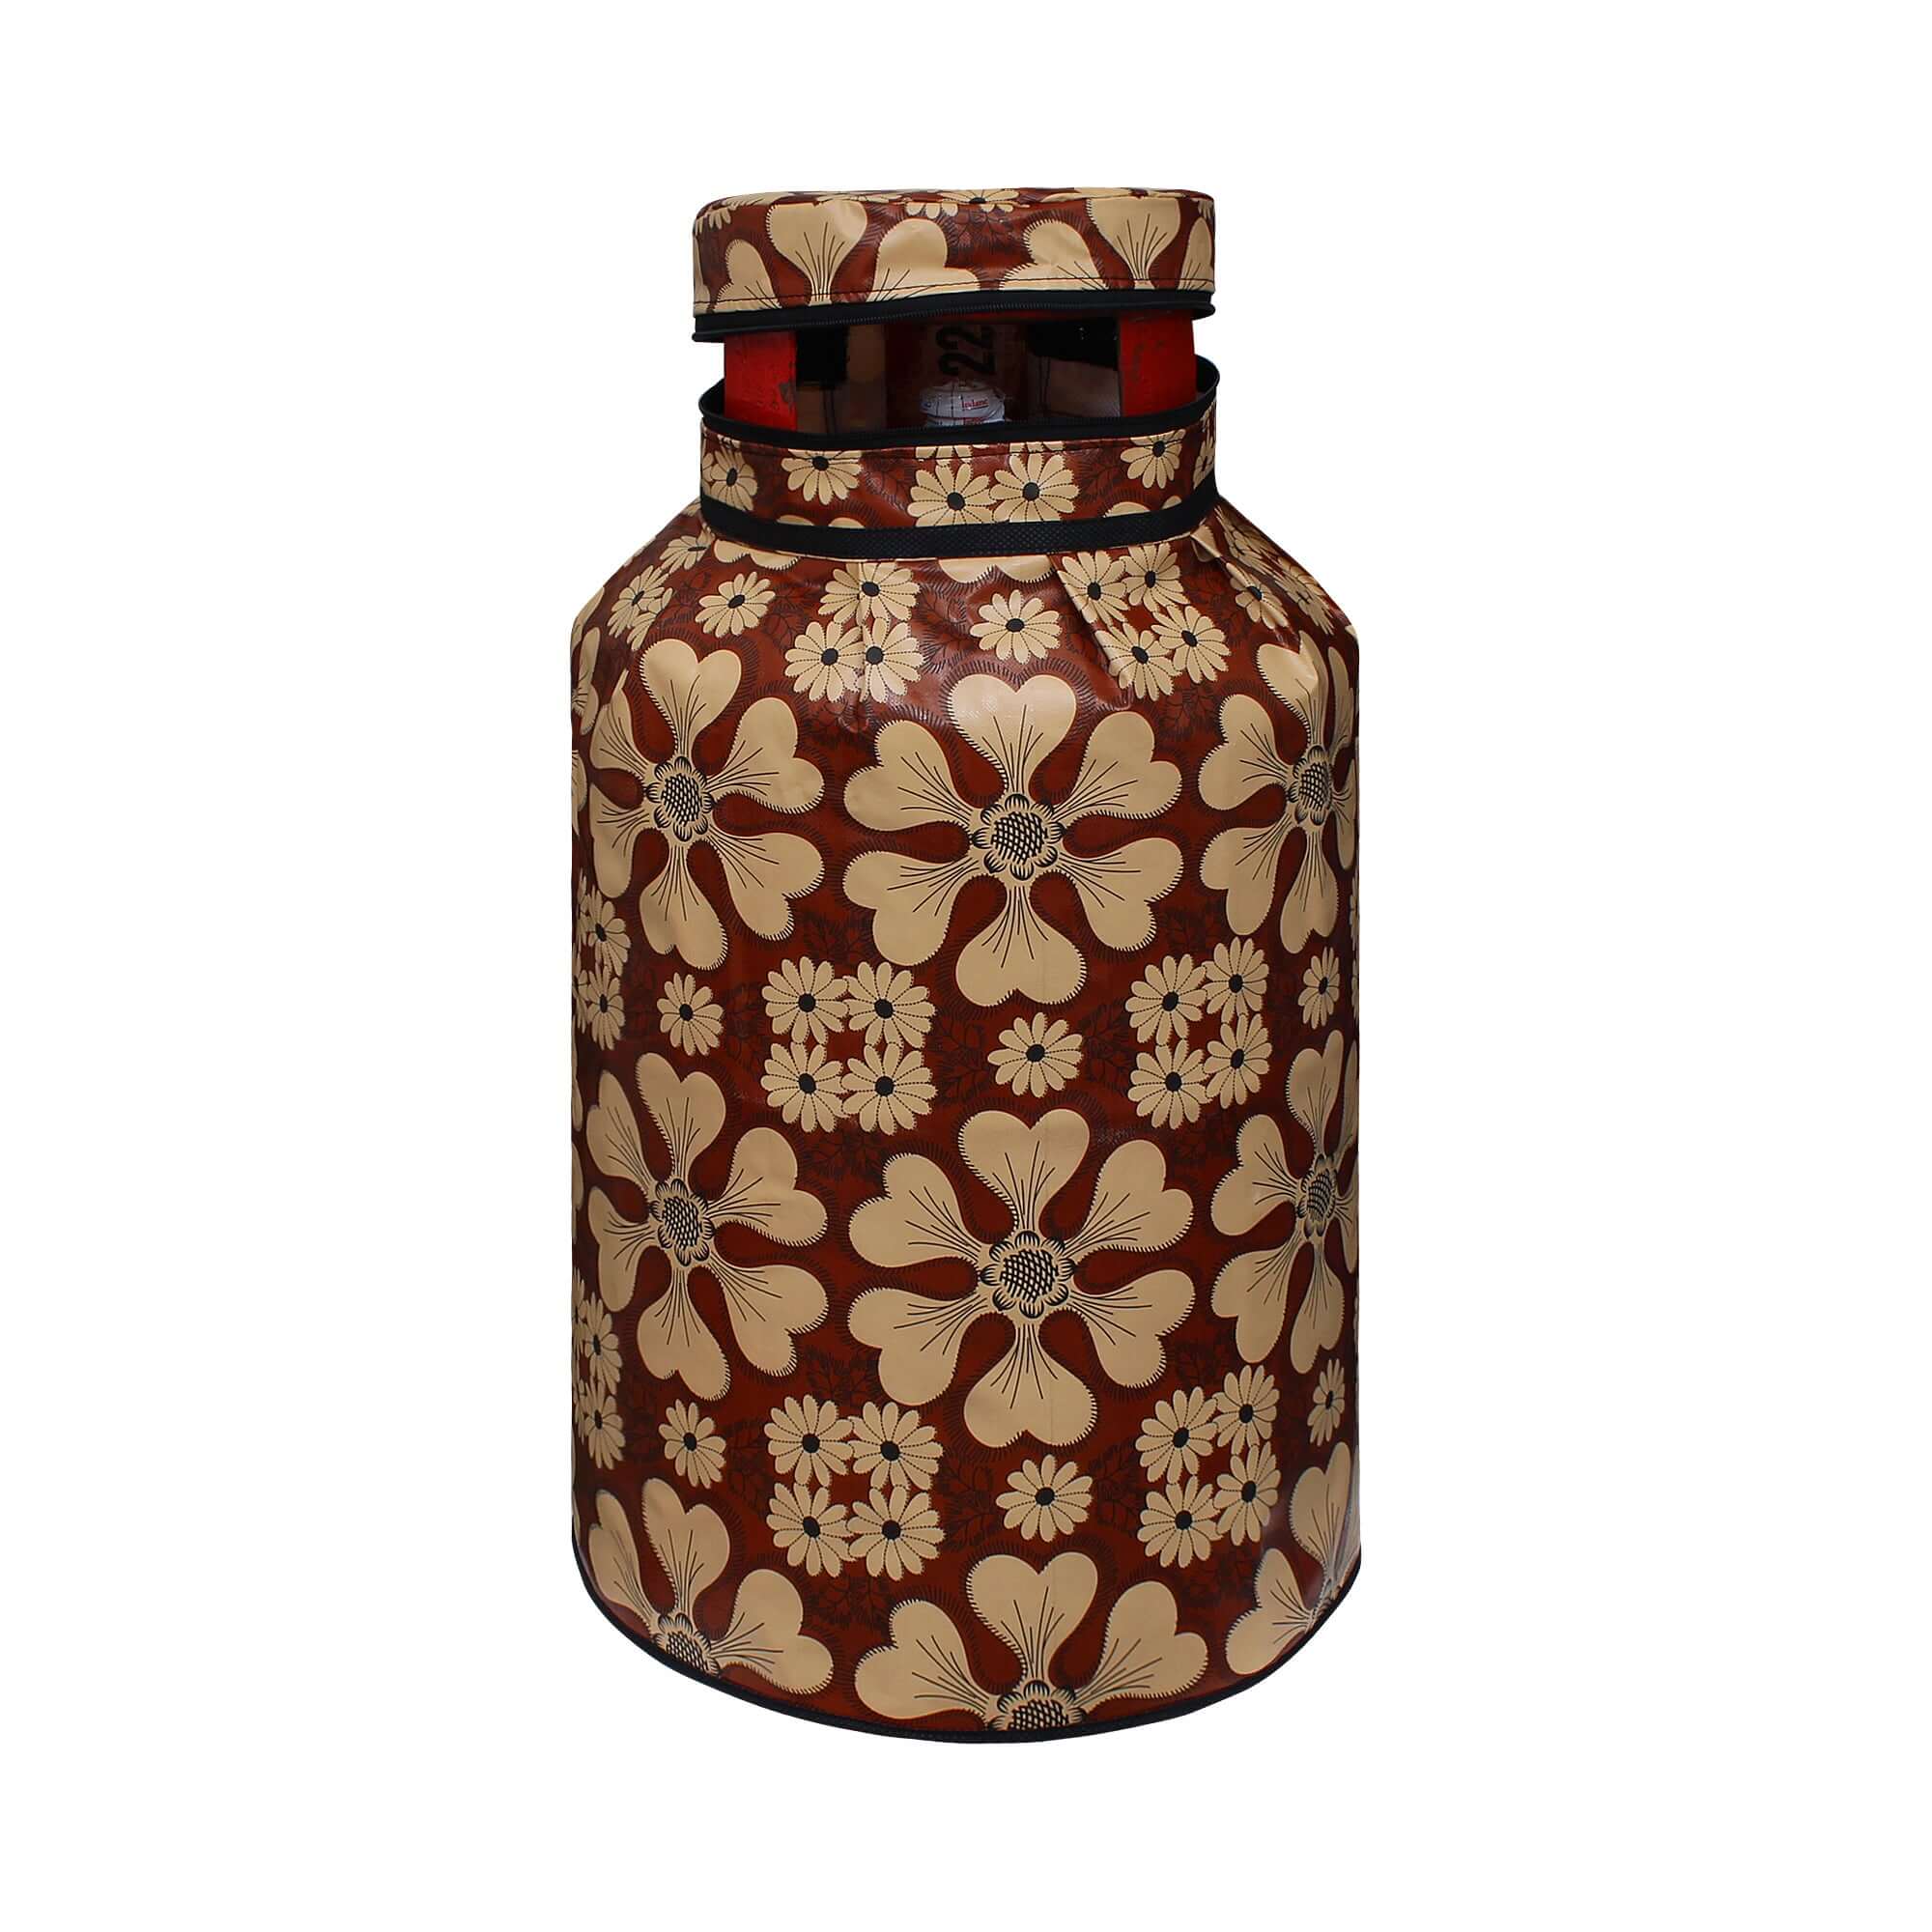 LPG Gas Cylinder Cover, SA62 - Dream Care Furnishings Private Limited